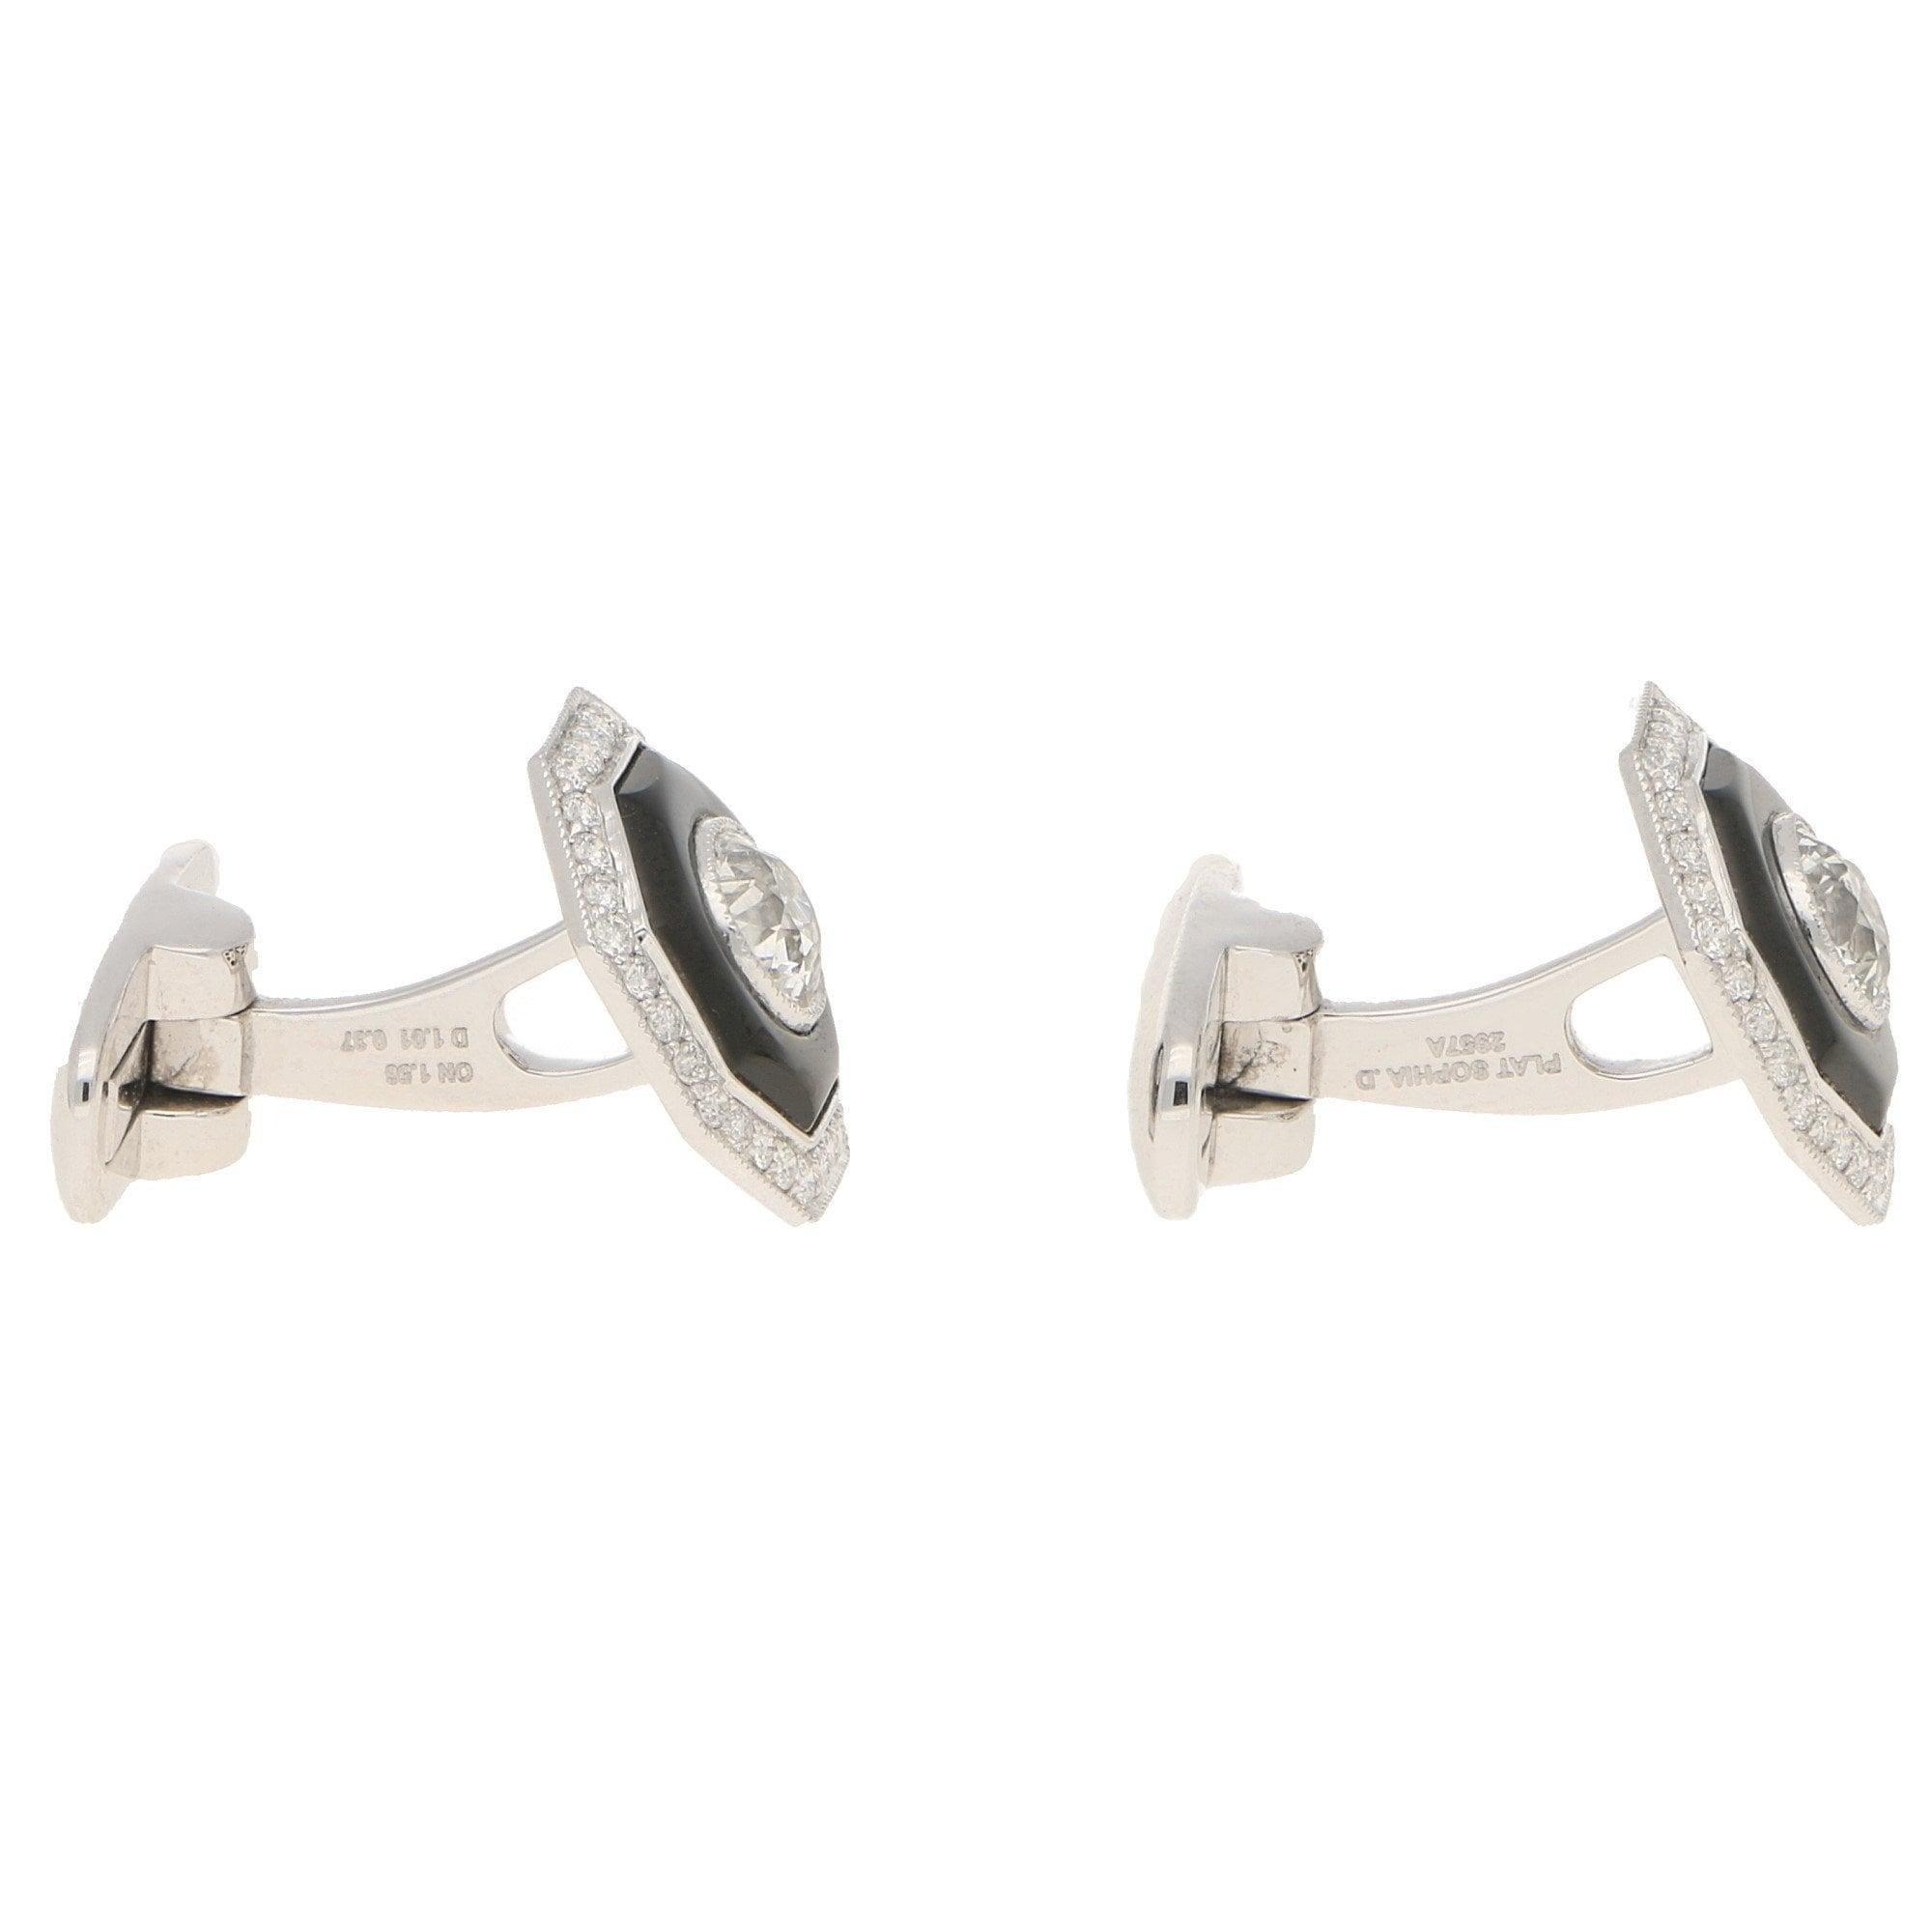 does target sell cufflinks